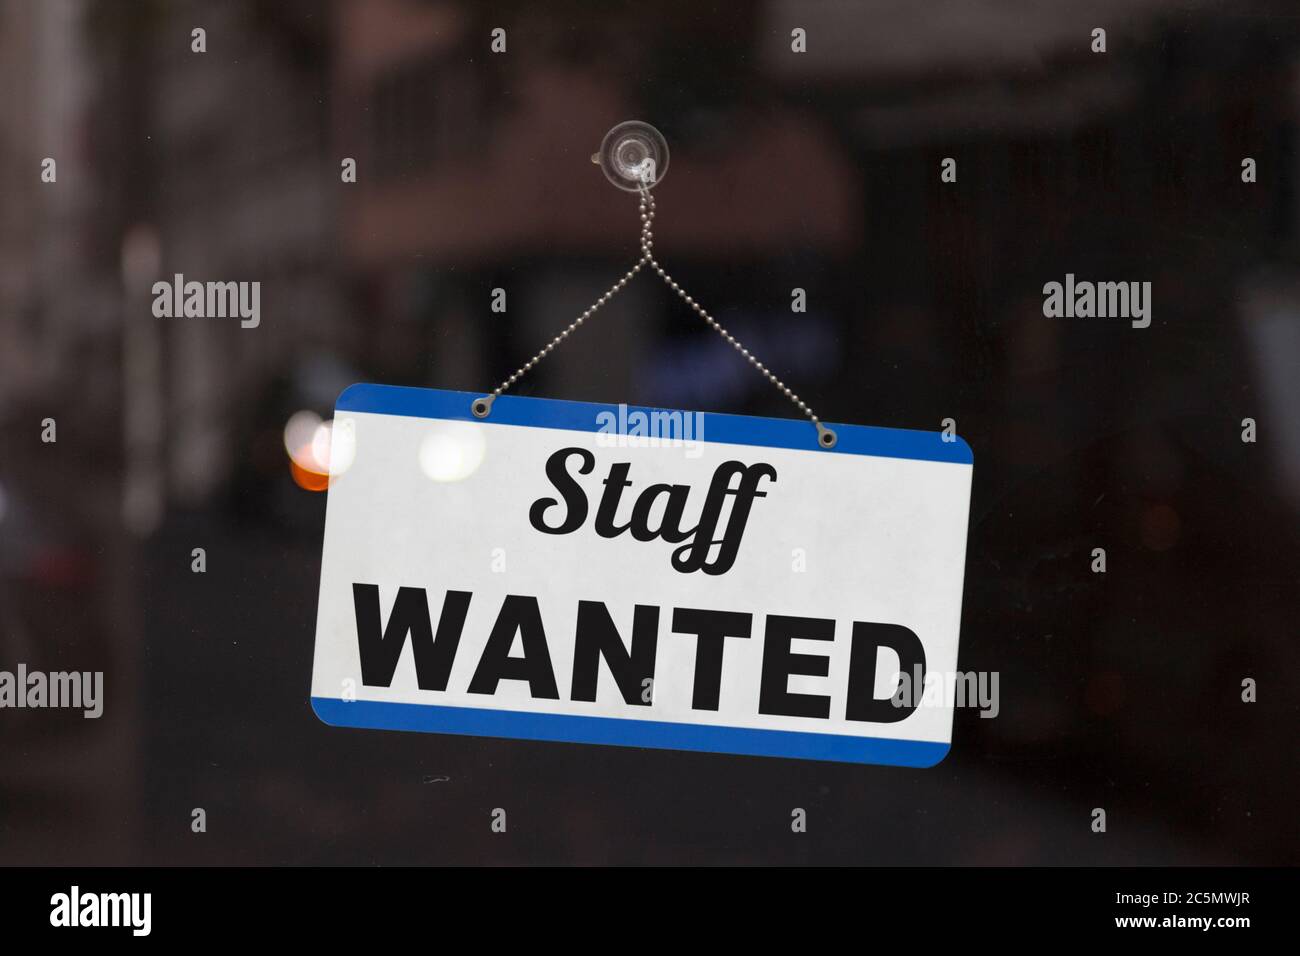 Close-up on a blue open sign in the window of a shop displaying the message: Staff wanted. Stock Photo